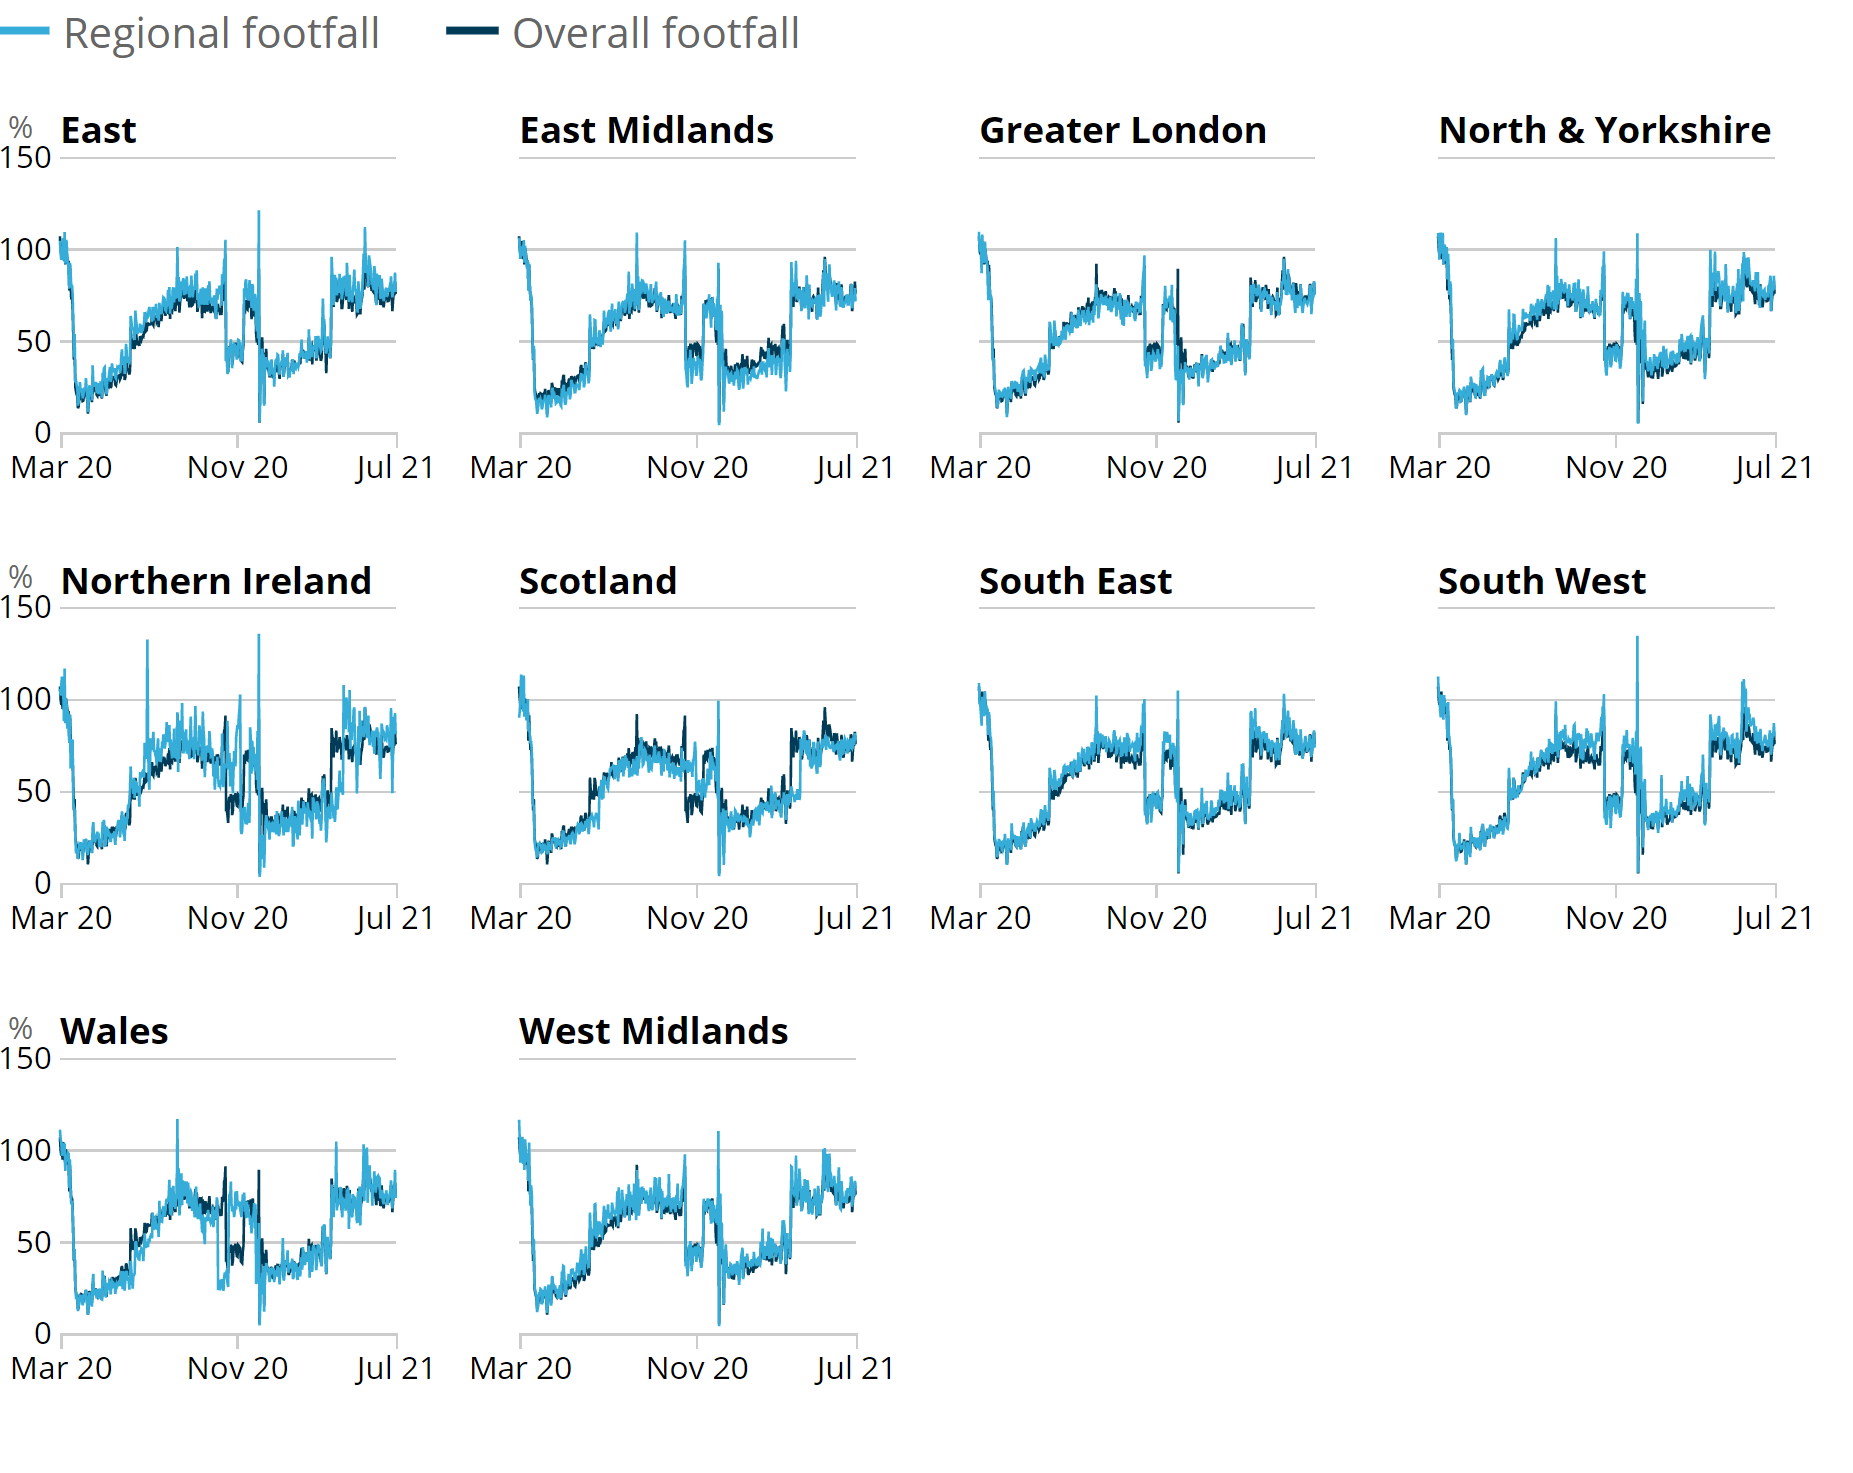 Line charts showing in the week to 17 July 2021, the regions with the highest retail footfall relative to pre-pandemic levels were Northern Ireland, South West England and the West Midlands at 79% of the level in the same week of 2019.